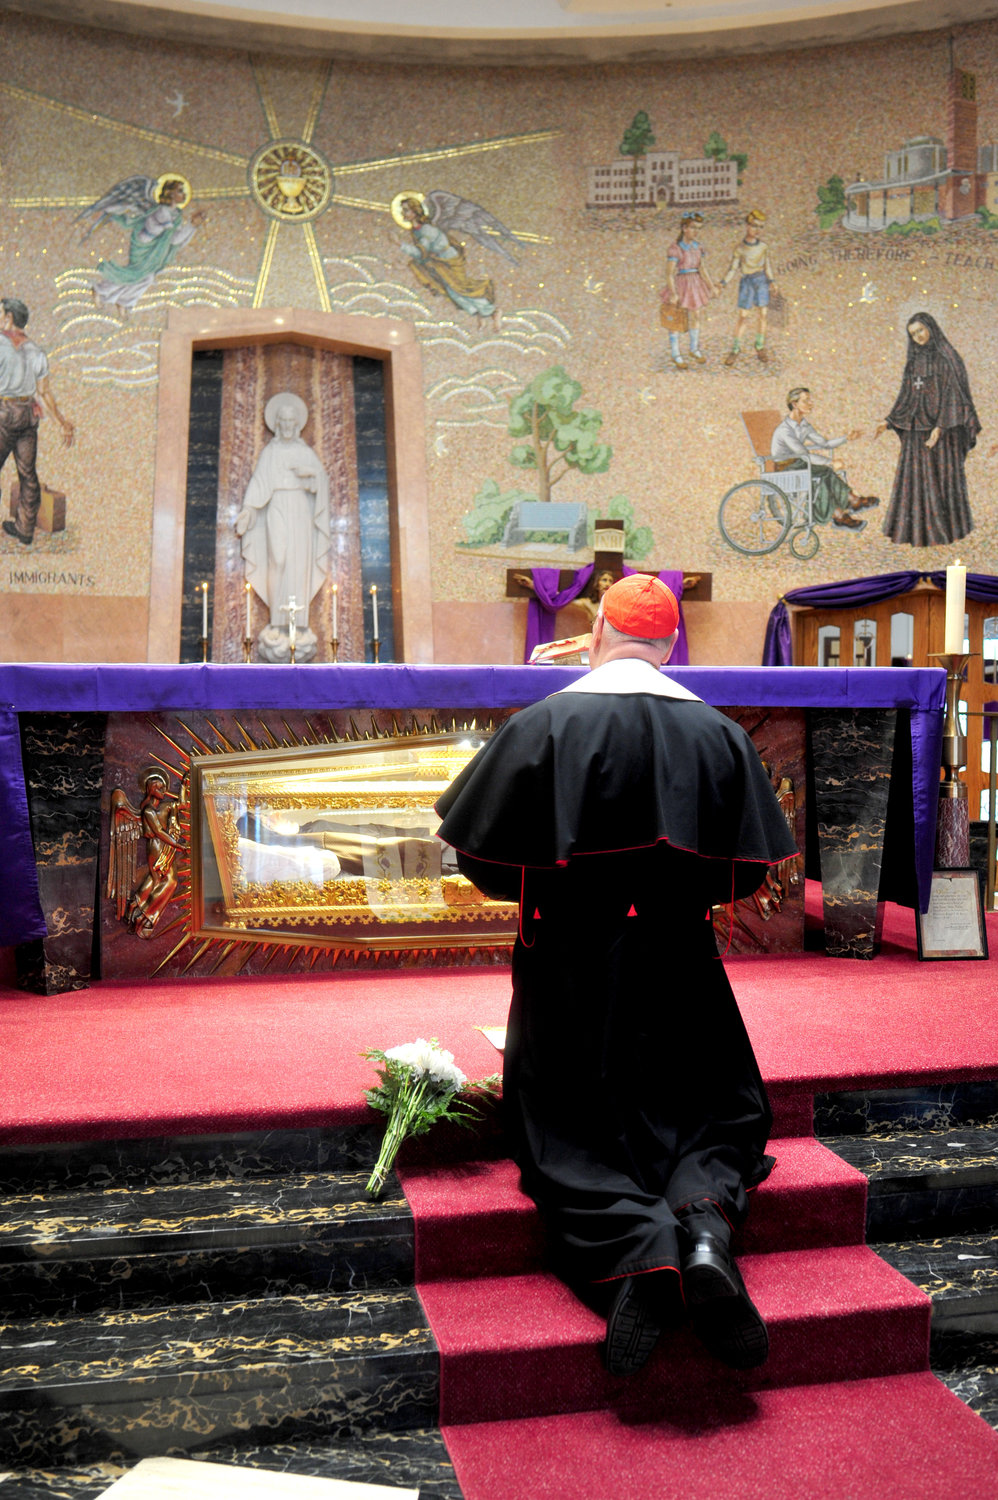 PRAYERS IN A PANDEMIC—Cardinal Dolan, kneeling at St. Frances Cabrini Shrine in Manhattan March 22, prays for healing and protection in the coronavirus pandemic that is plaguing the city, state, nation and world. The day before, he also prayed privately at two shrines dedicated to the Blessed Mother: the National Shrine of Our Lady of Mount Carmel in Middletown and the Shrine of Mary Help of Christians in Stony Point.